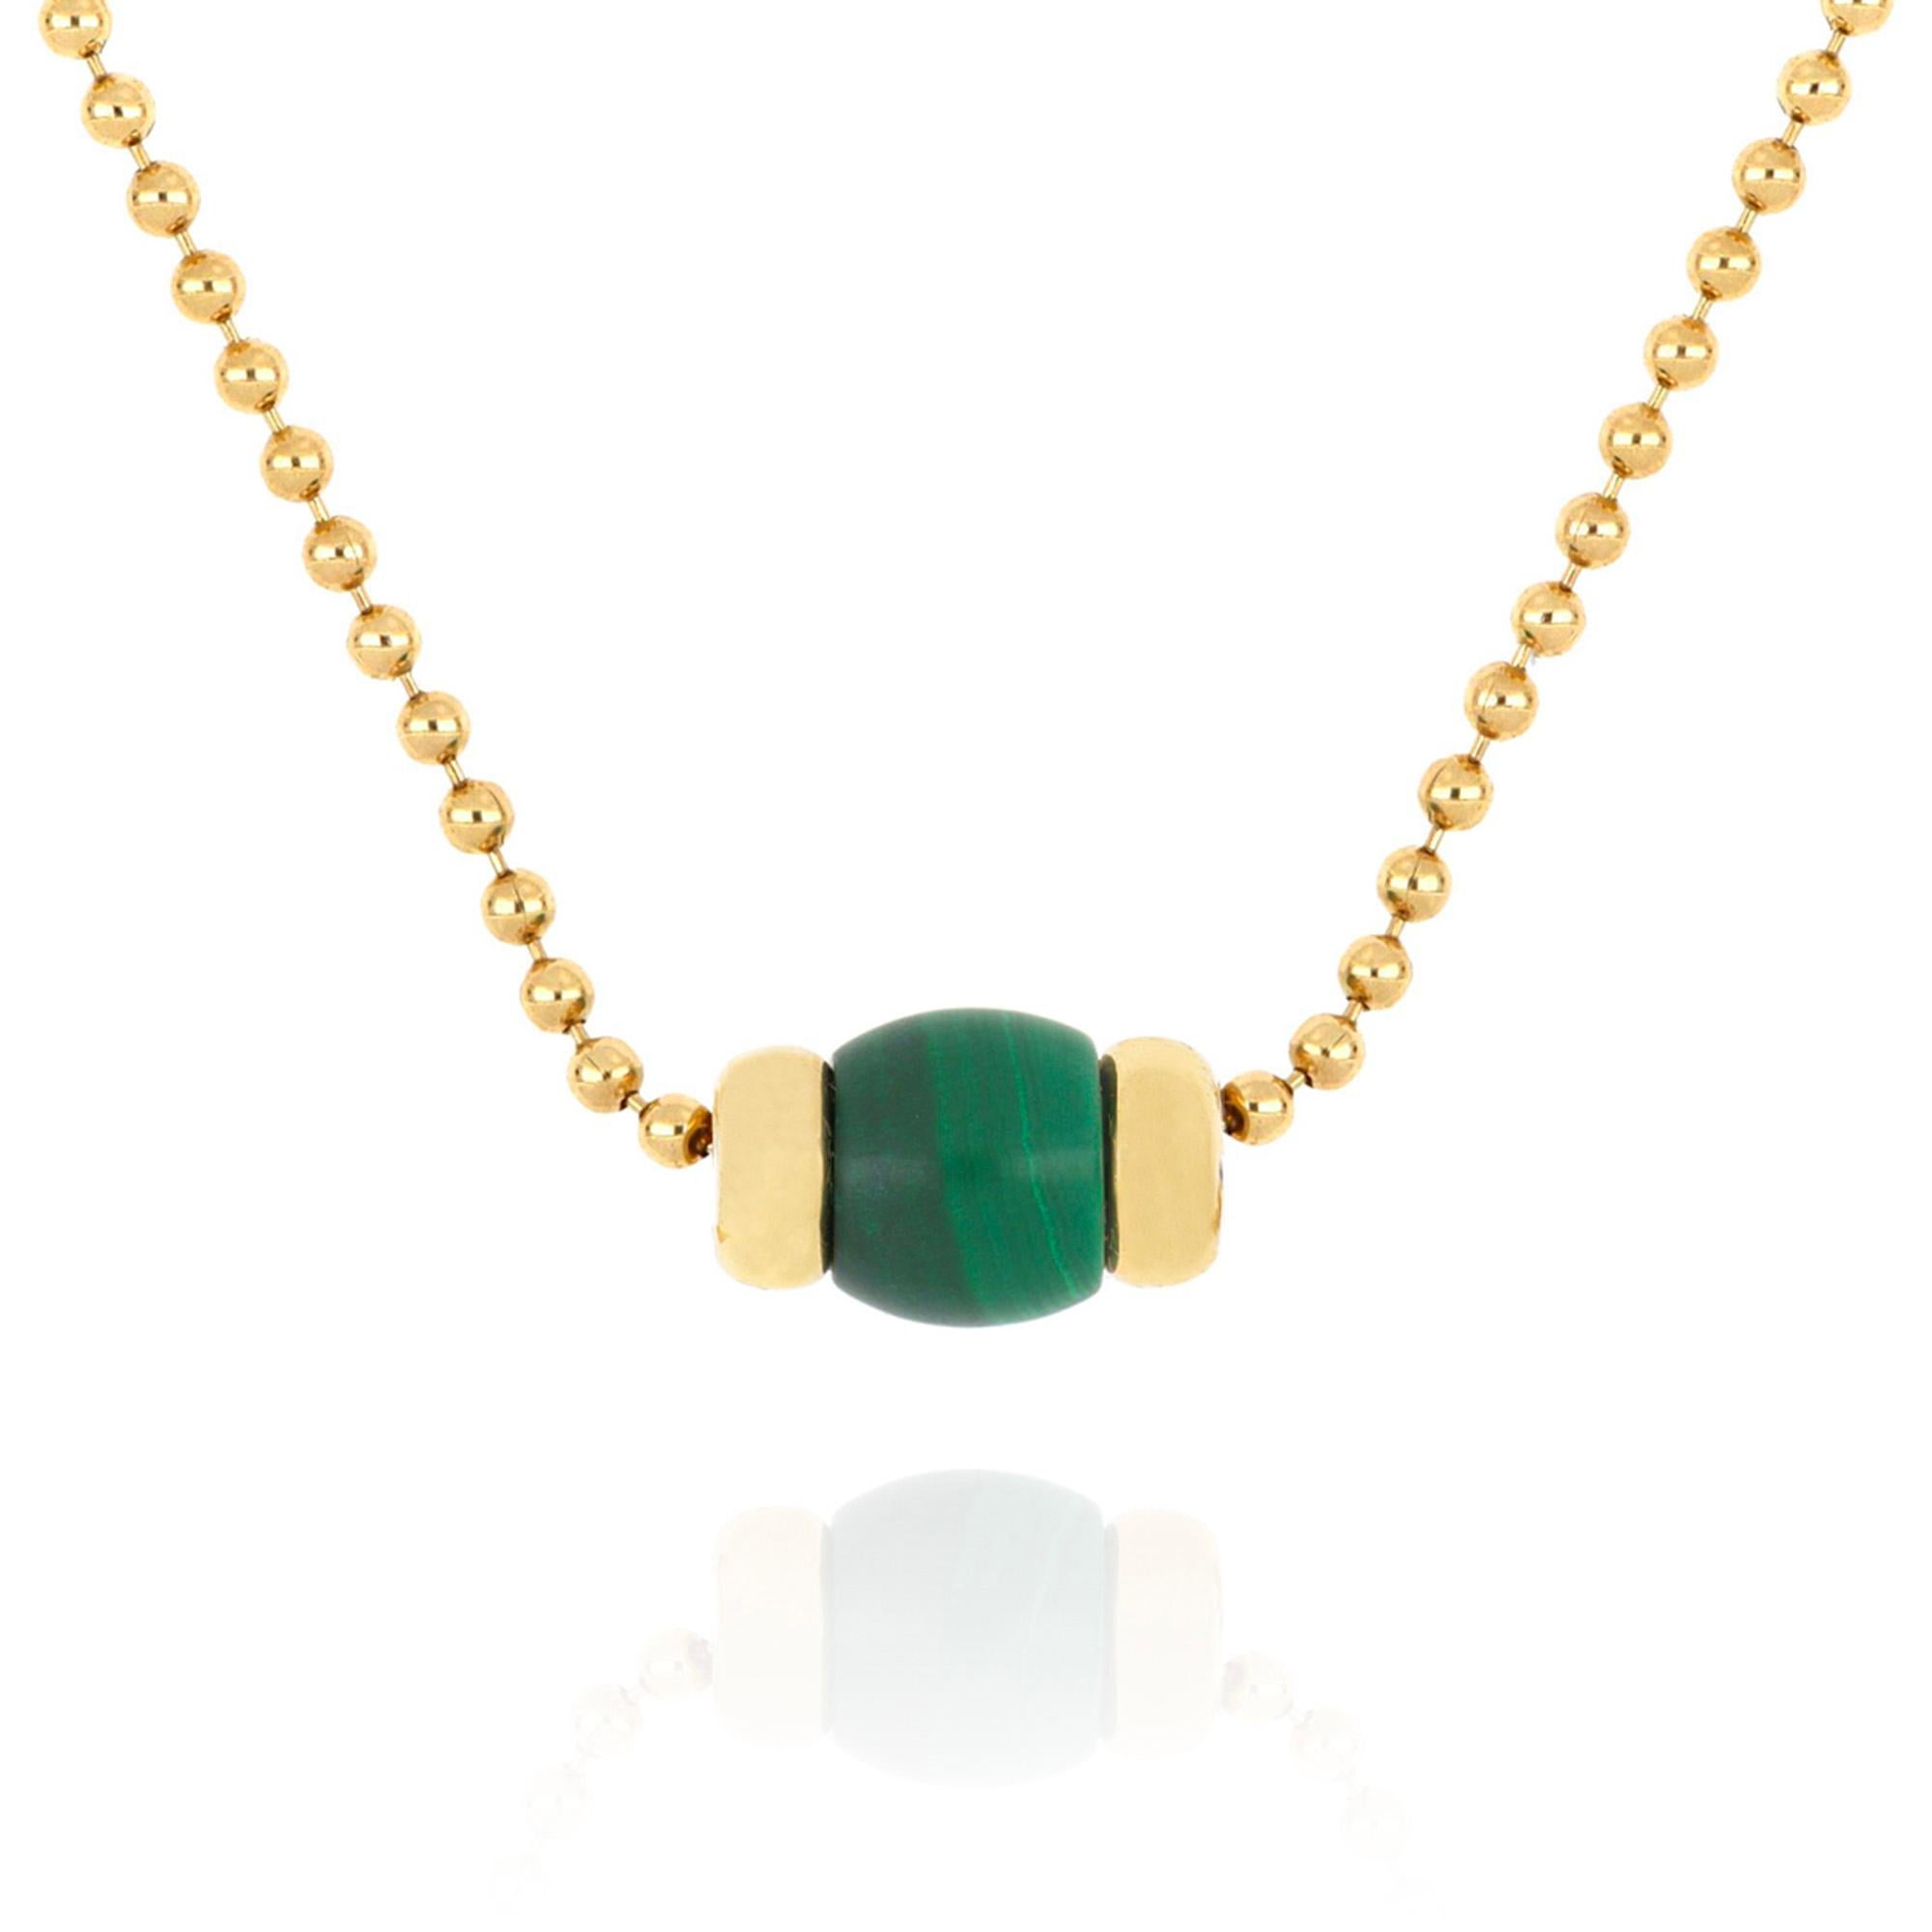 Avant-garde design, simple and linear volumes come together in this necklace from Le Carrousel collection. 18-karat yellow gold, combined with the deep green of malachite, ennobles the three-dimensionality of the barrel-shaped central element.